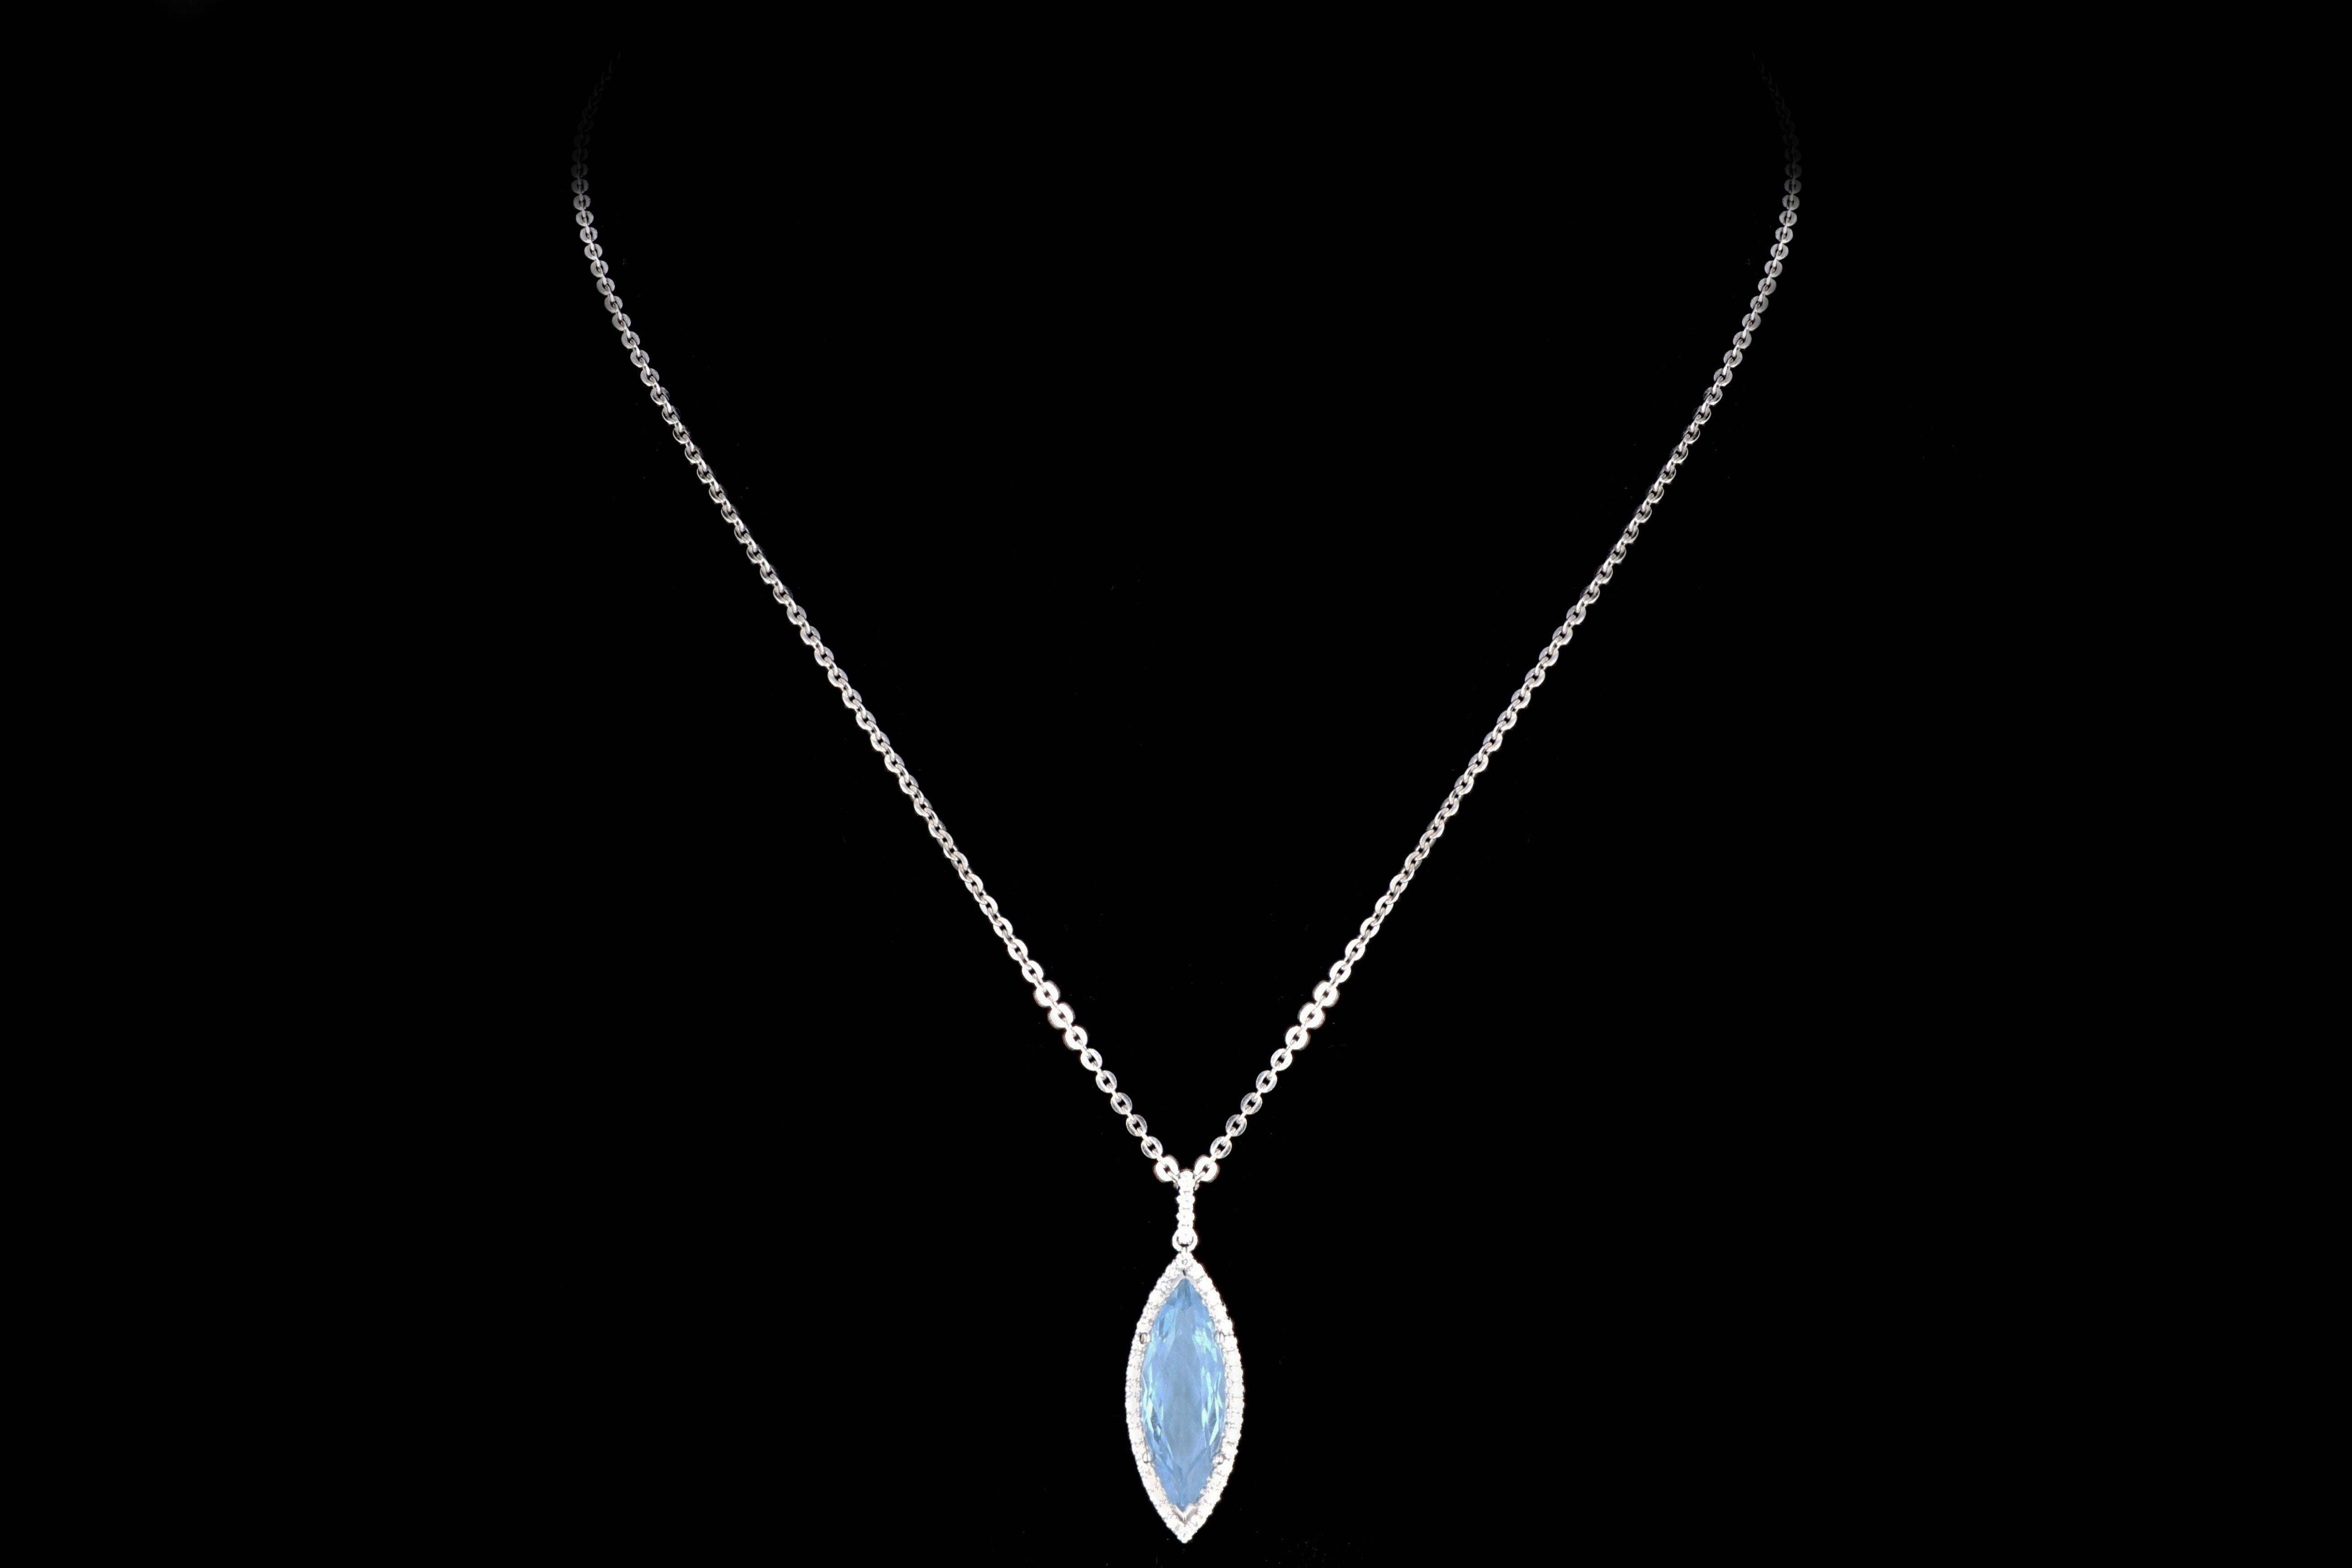 Era: New

Composition: 14K White Gold

Primary Stone: Aquamarine

Carat Weight: 4.47 Carats

Accent Stone: Round Brilliant Cut Diamond

Carat Weight: .24 Carats

Color: G-H

Clarity: Vs1/2

Total Carat Weight: 4.71 Carats

Necklace Weight: 4.4 DWT